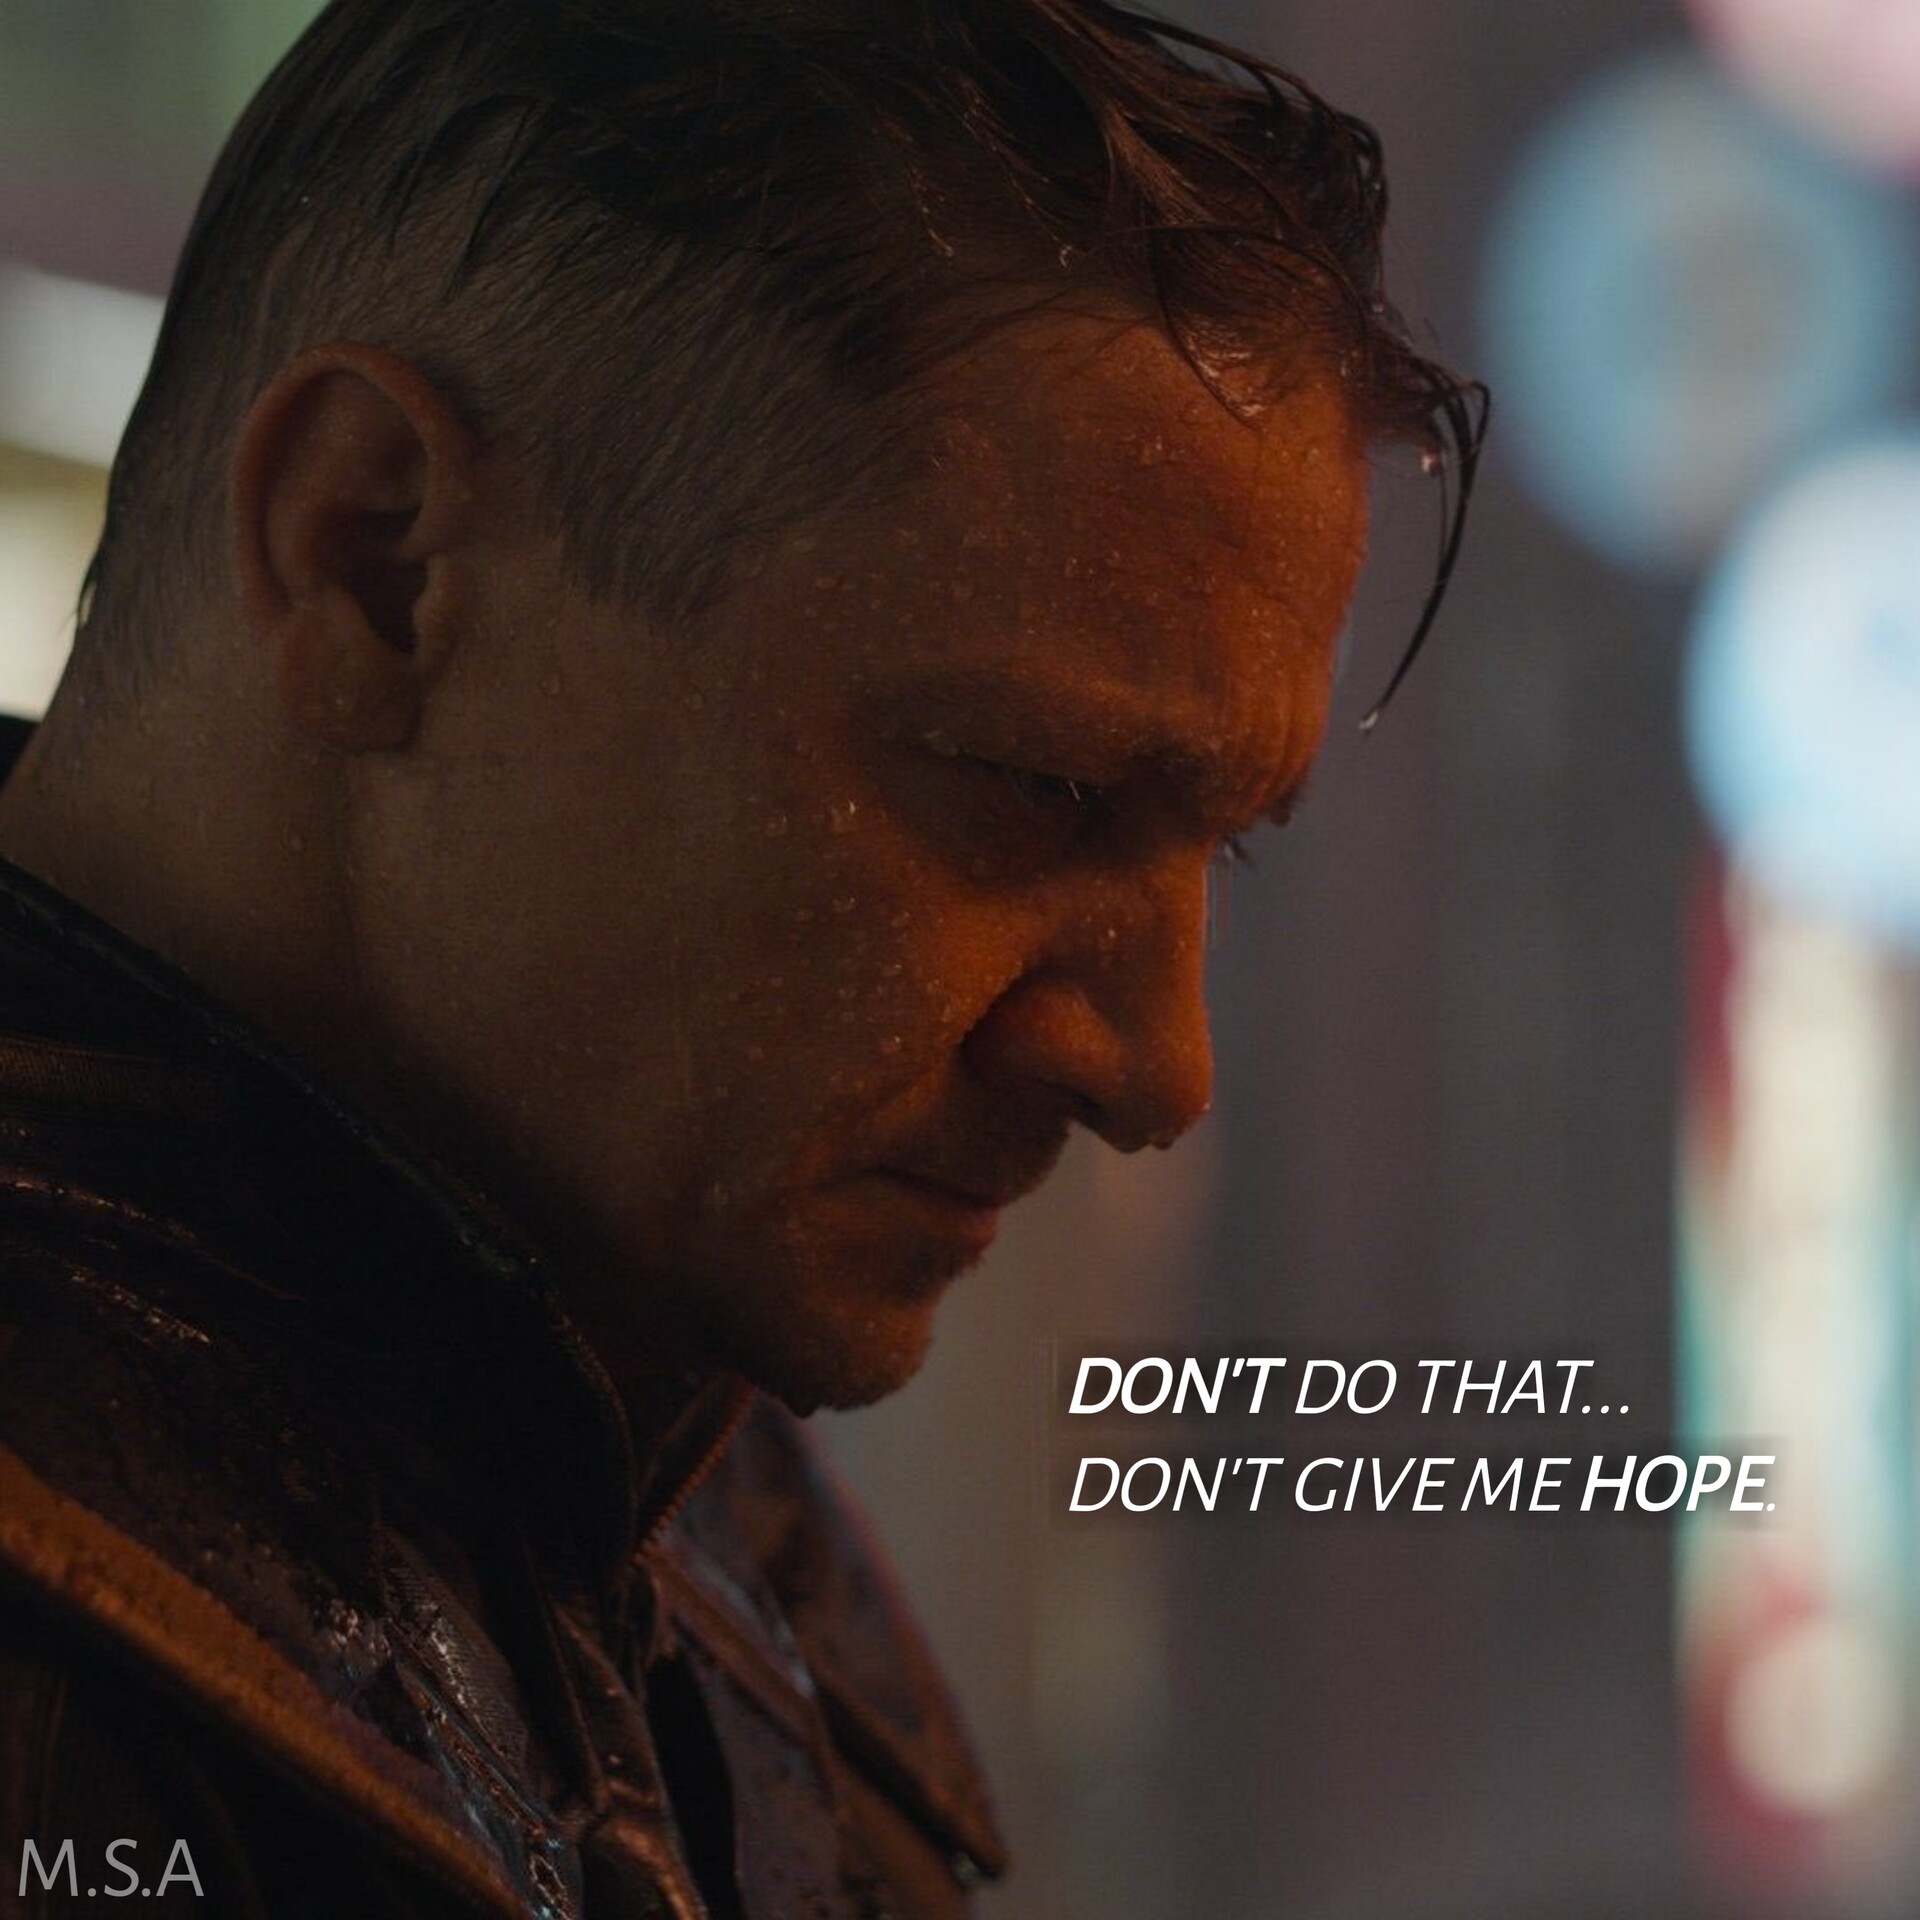 Ronin - don't do that. Don't give me hope.